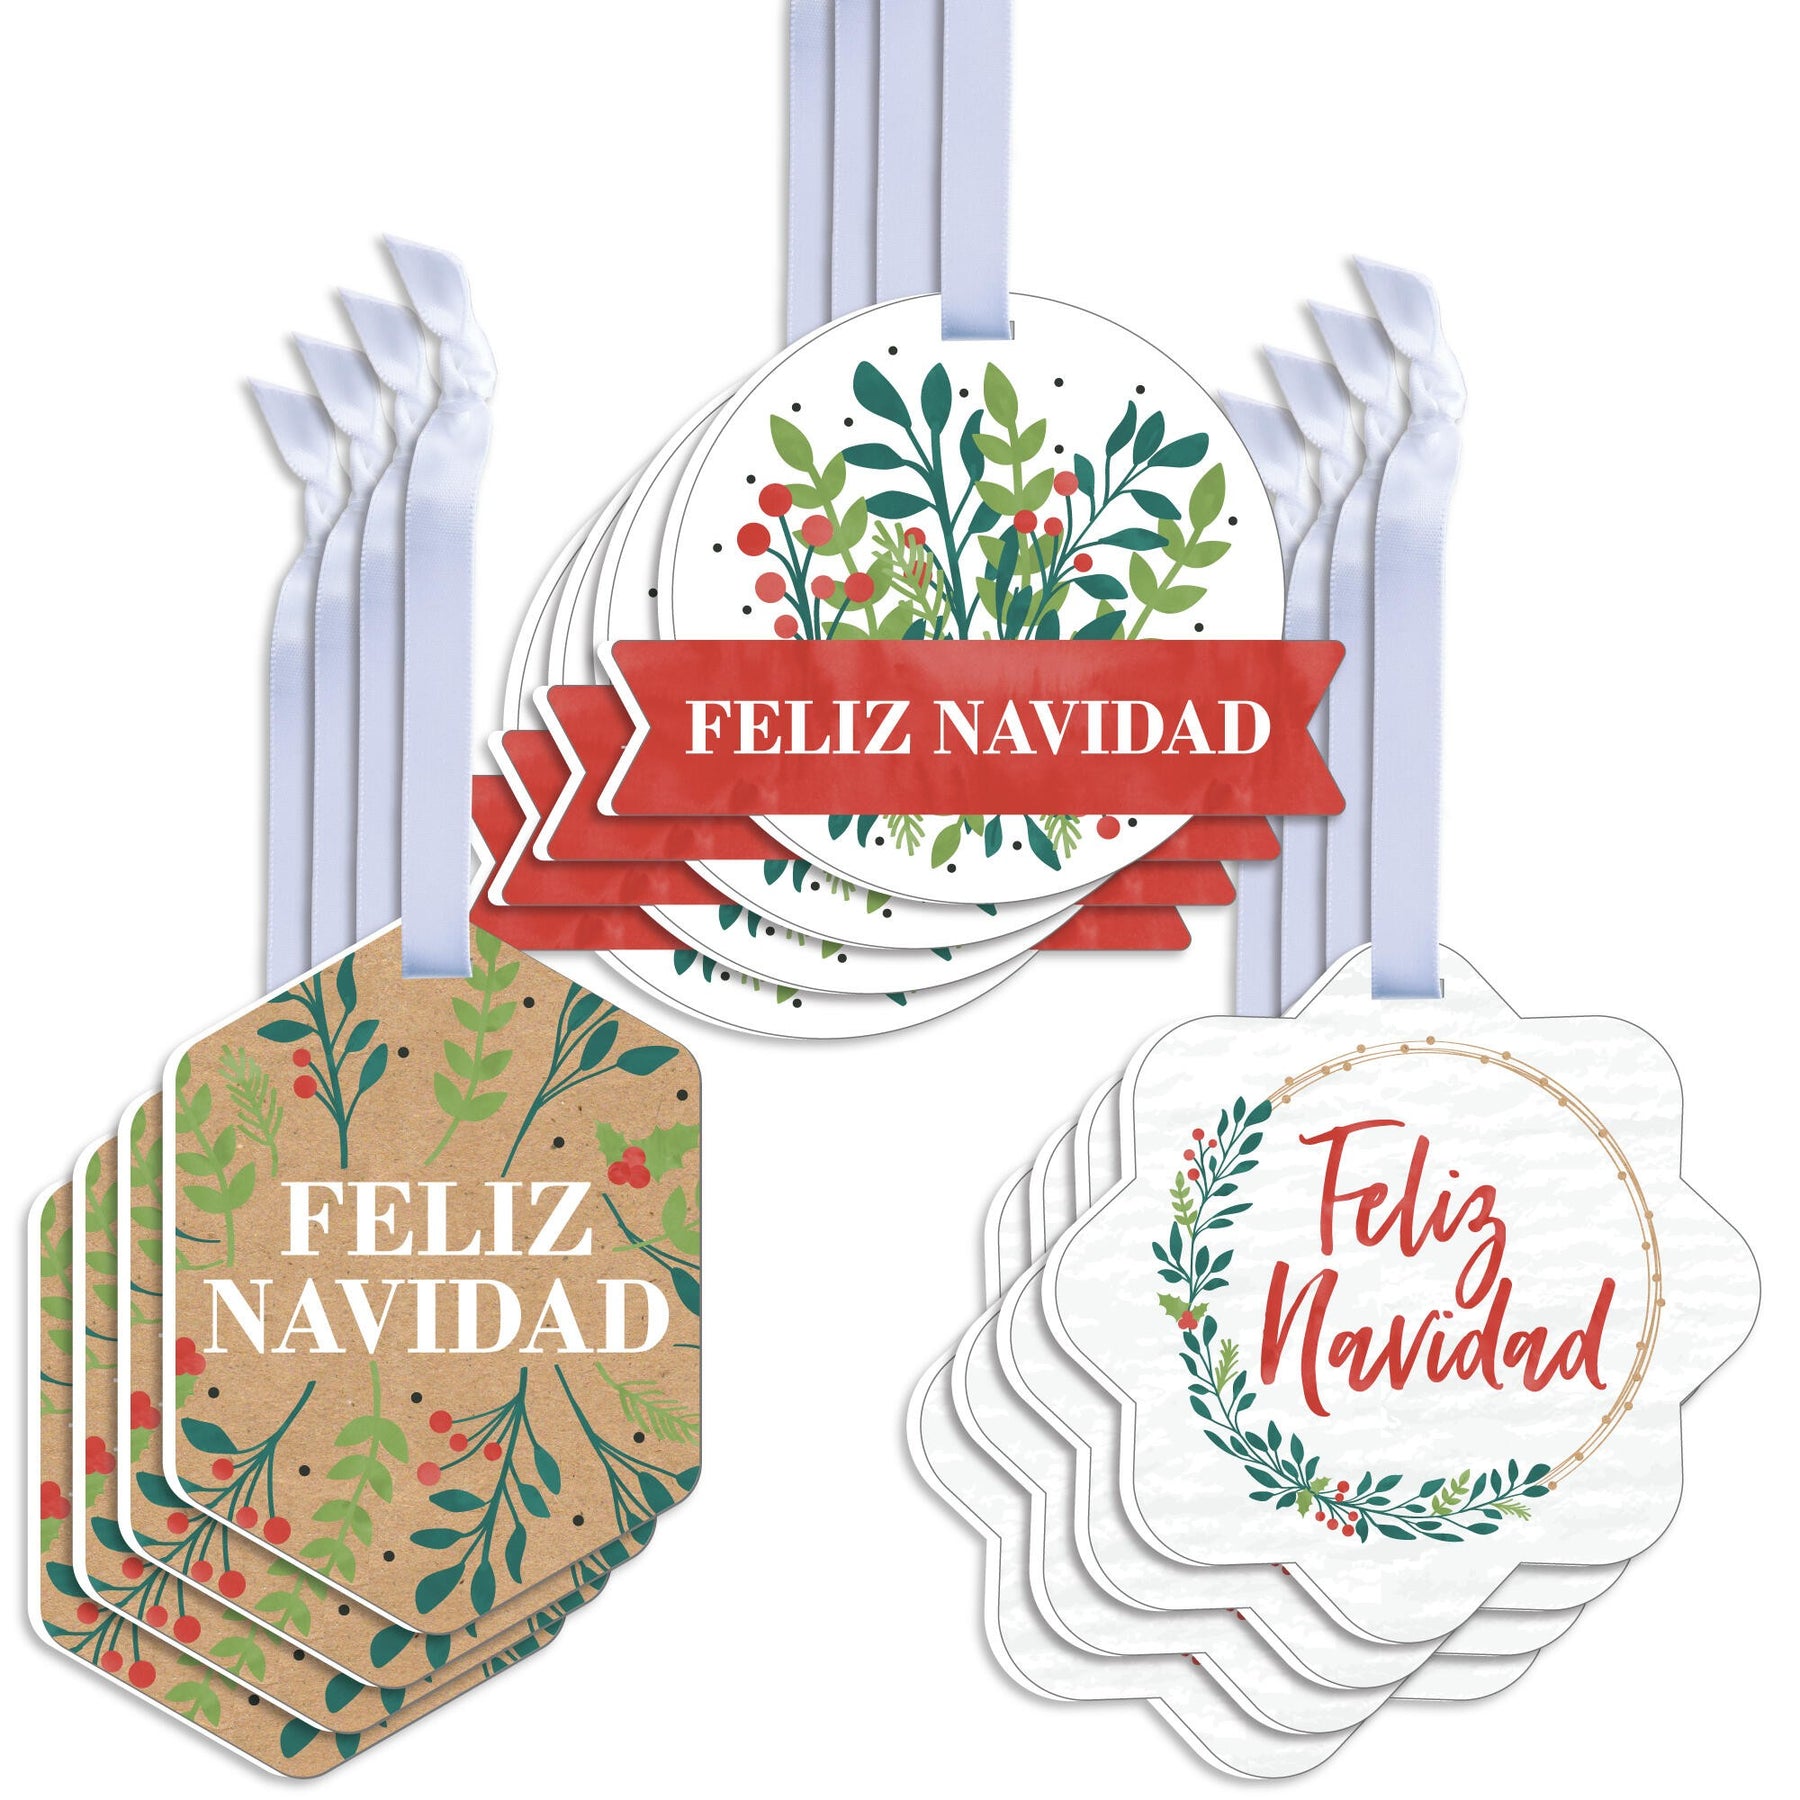 Holiday Gift Tags - Set of 12 (Assorted)